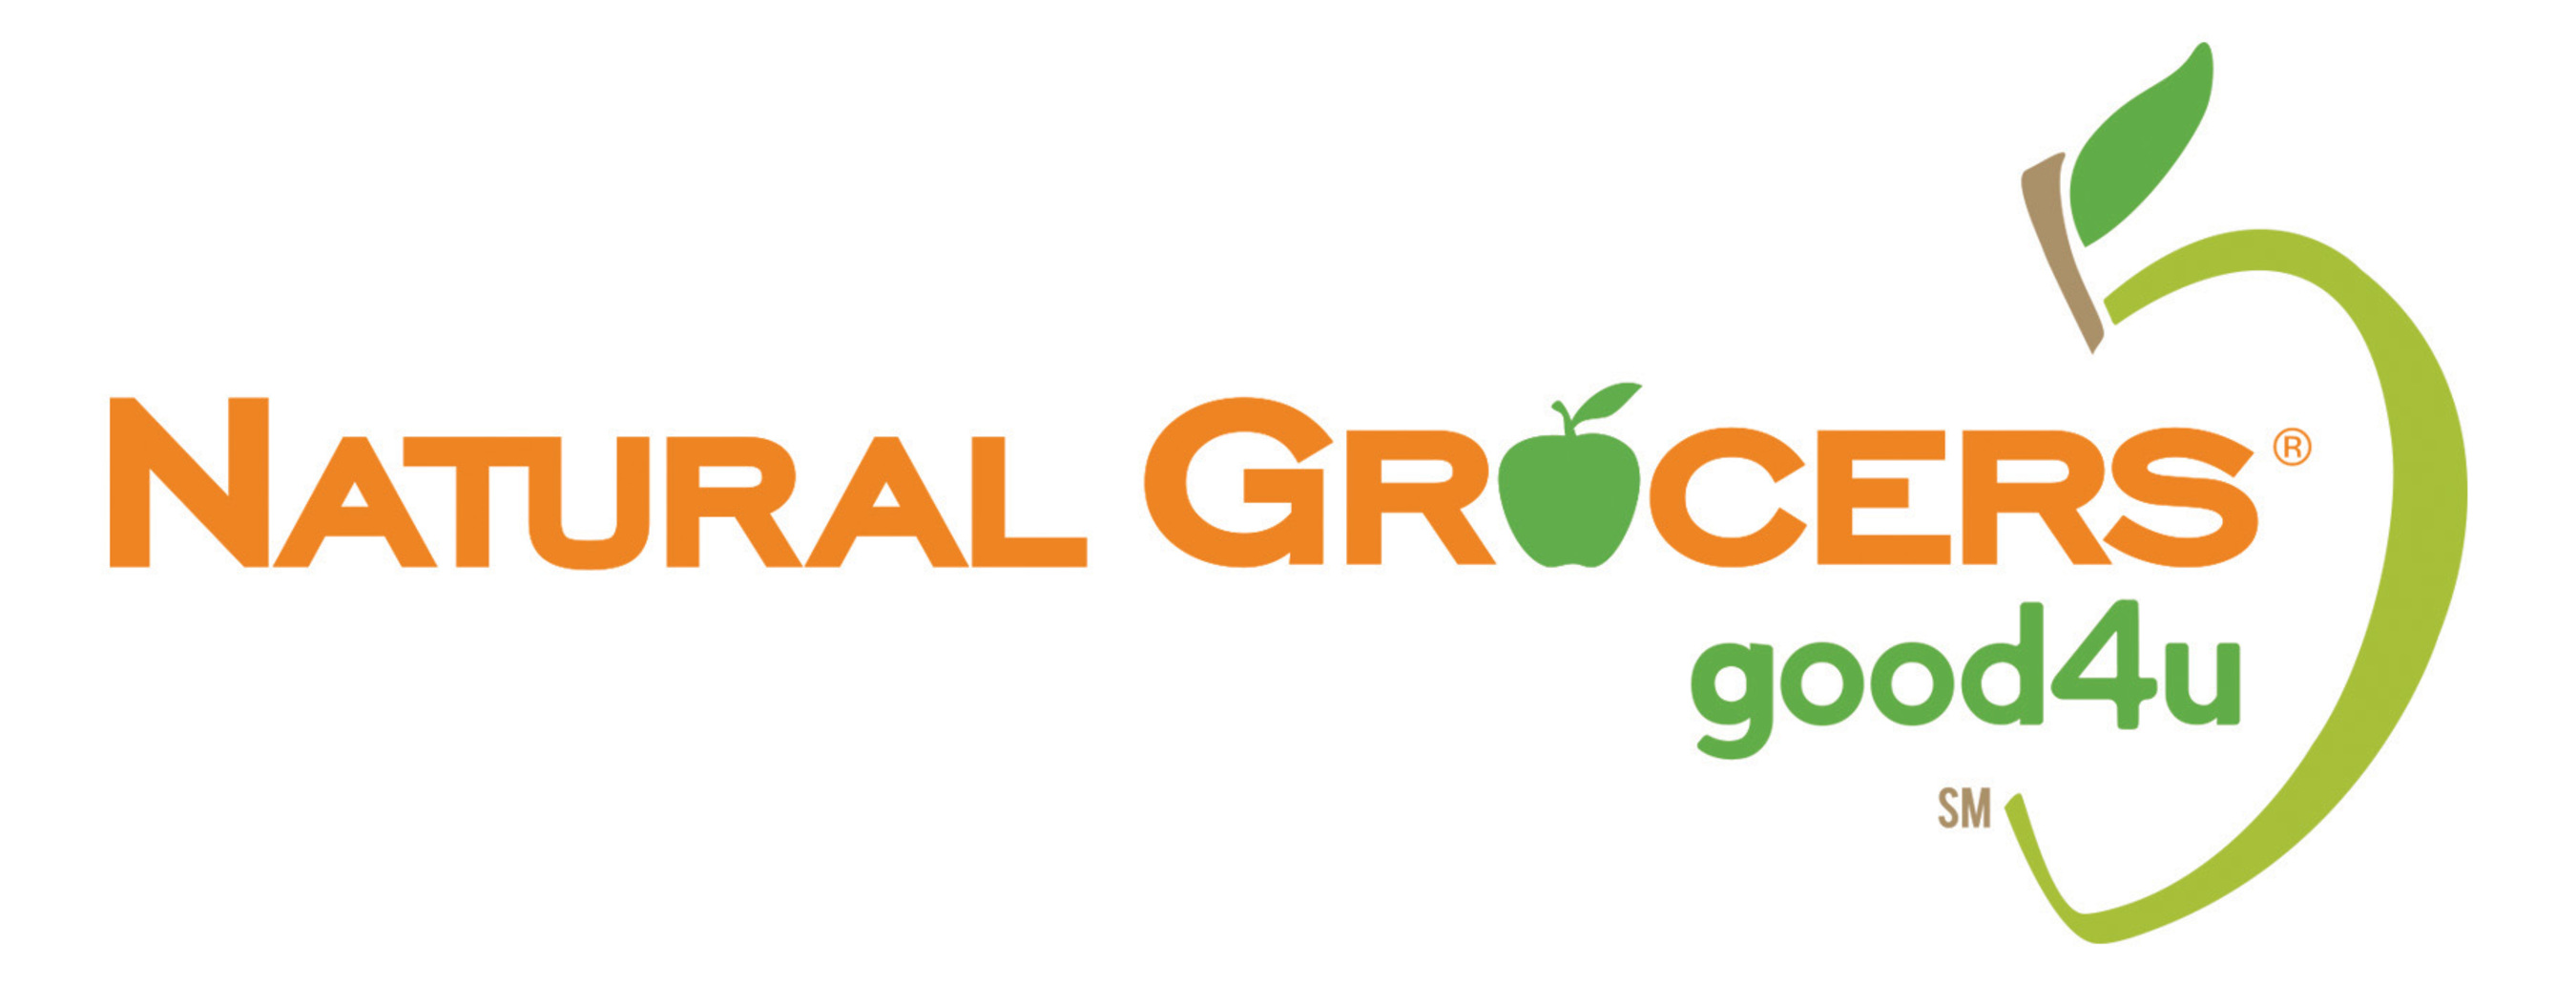 Natural Grocers To Host Pedal Forward Bike Drive On April 7 To